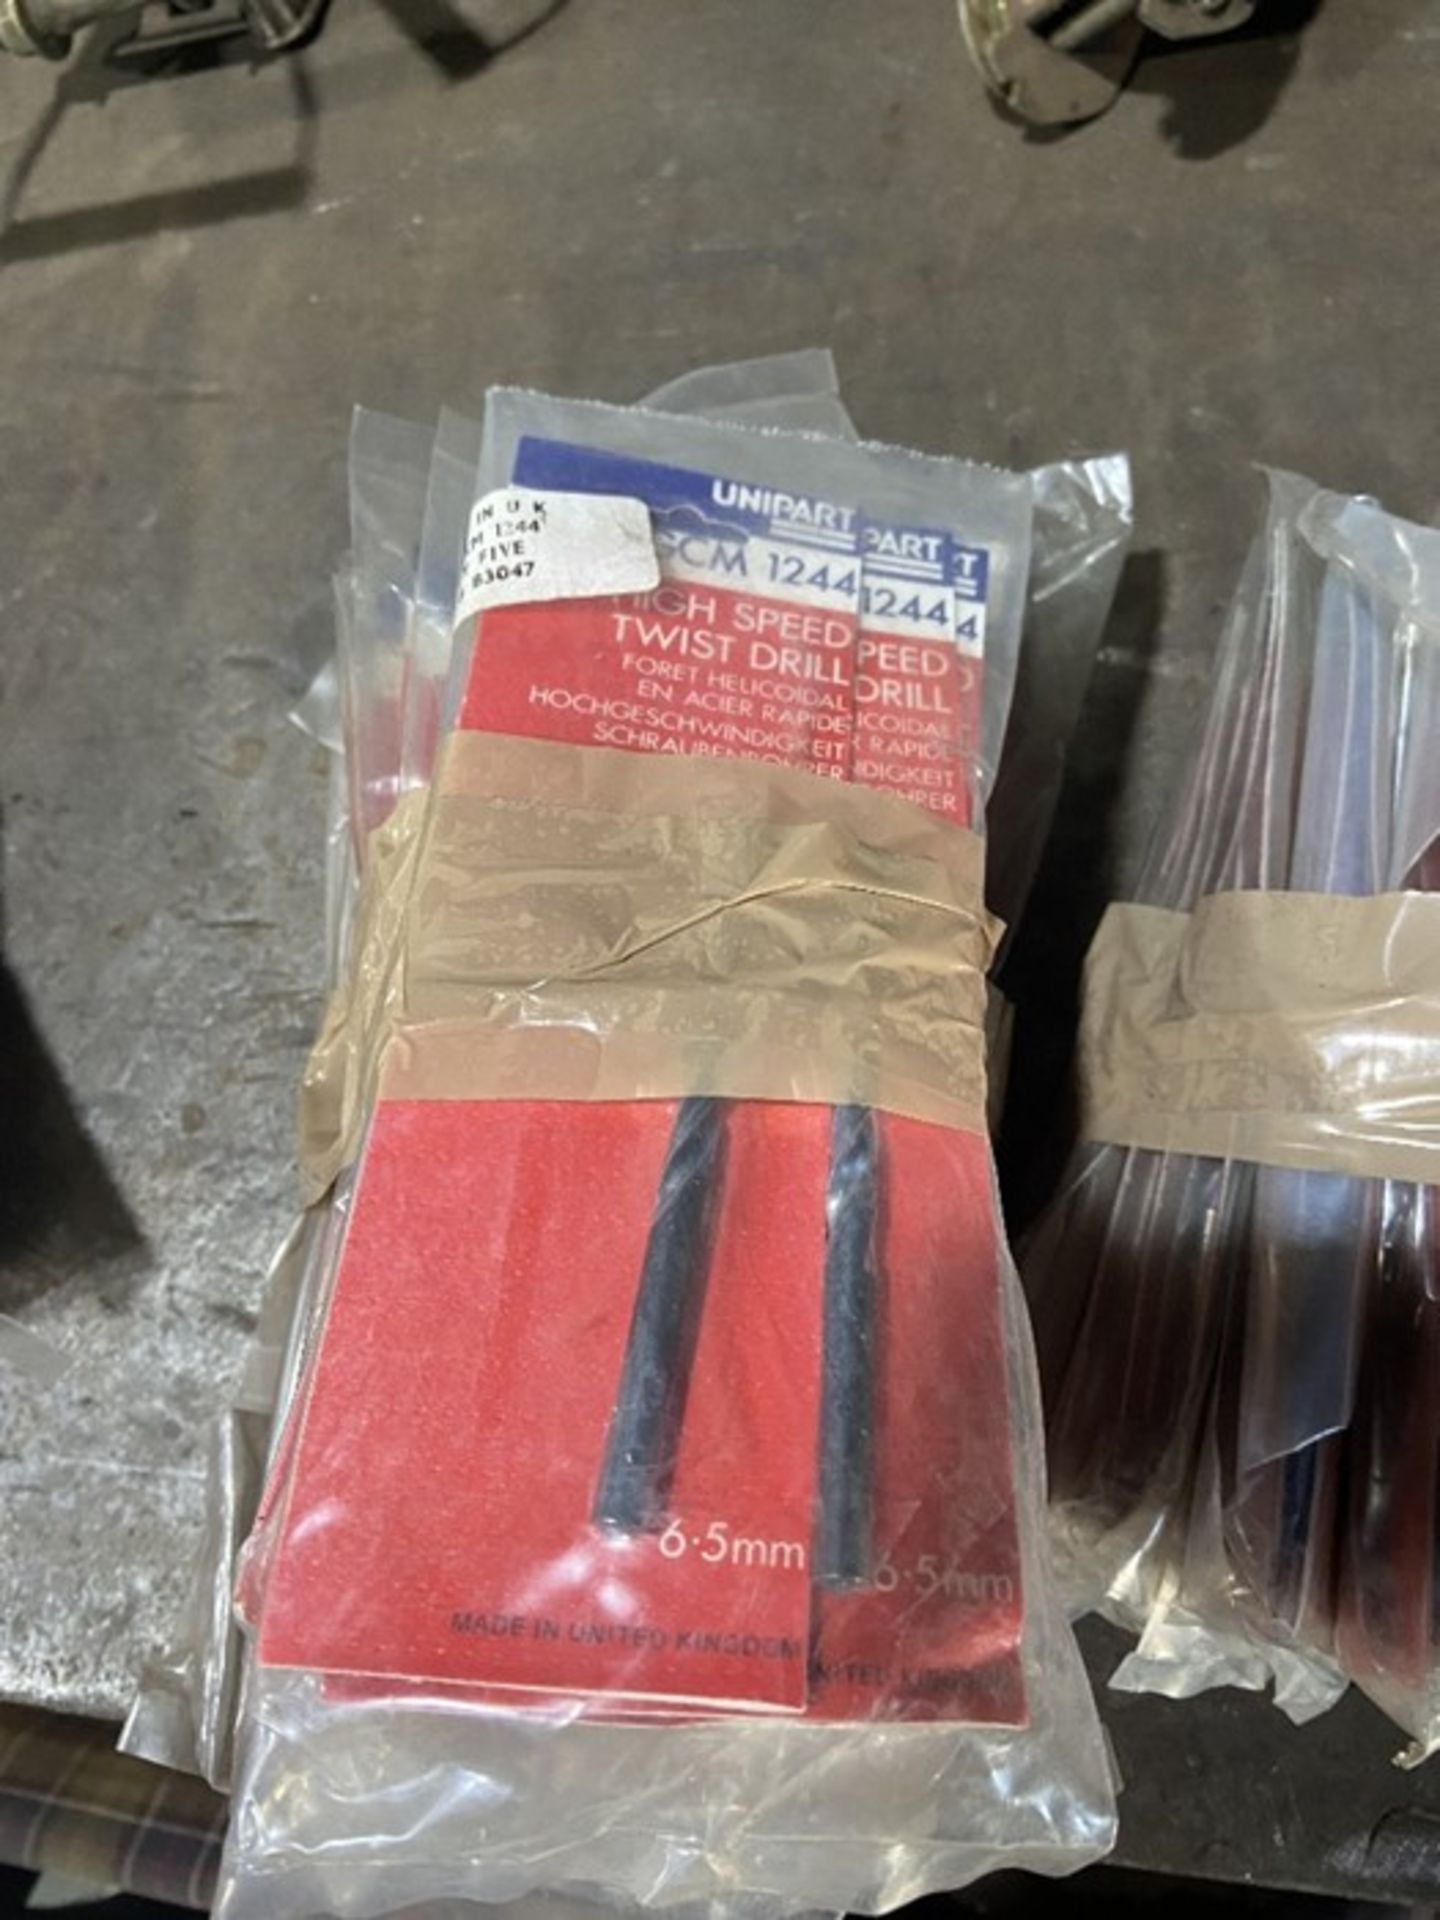 25 x 6.5mm & 25 x 7.5mm high speed drill bits (unused- in packets)